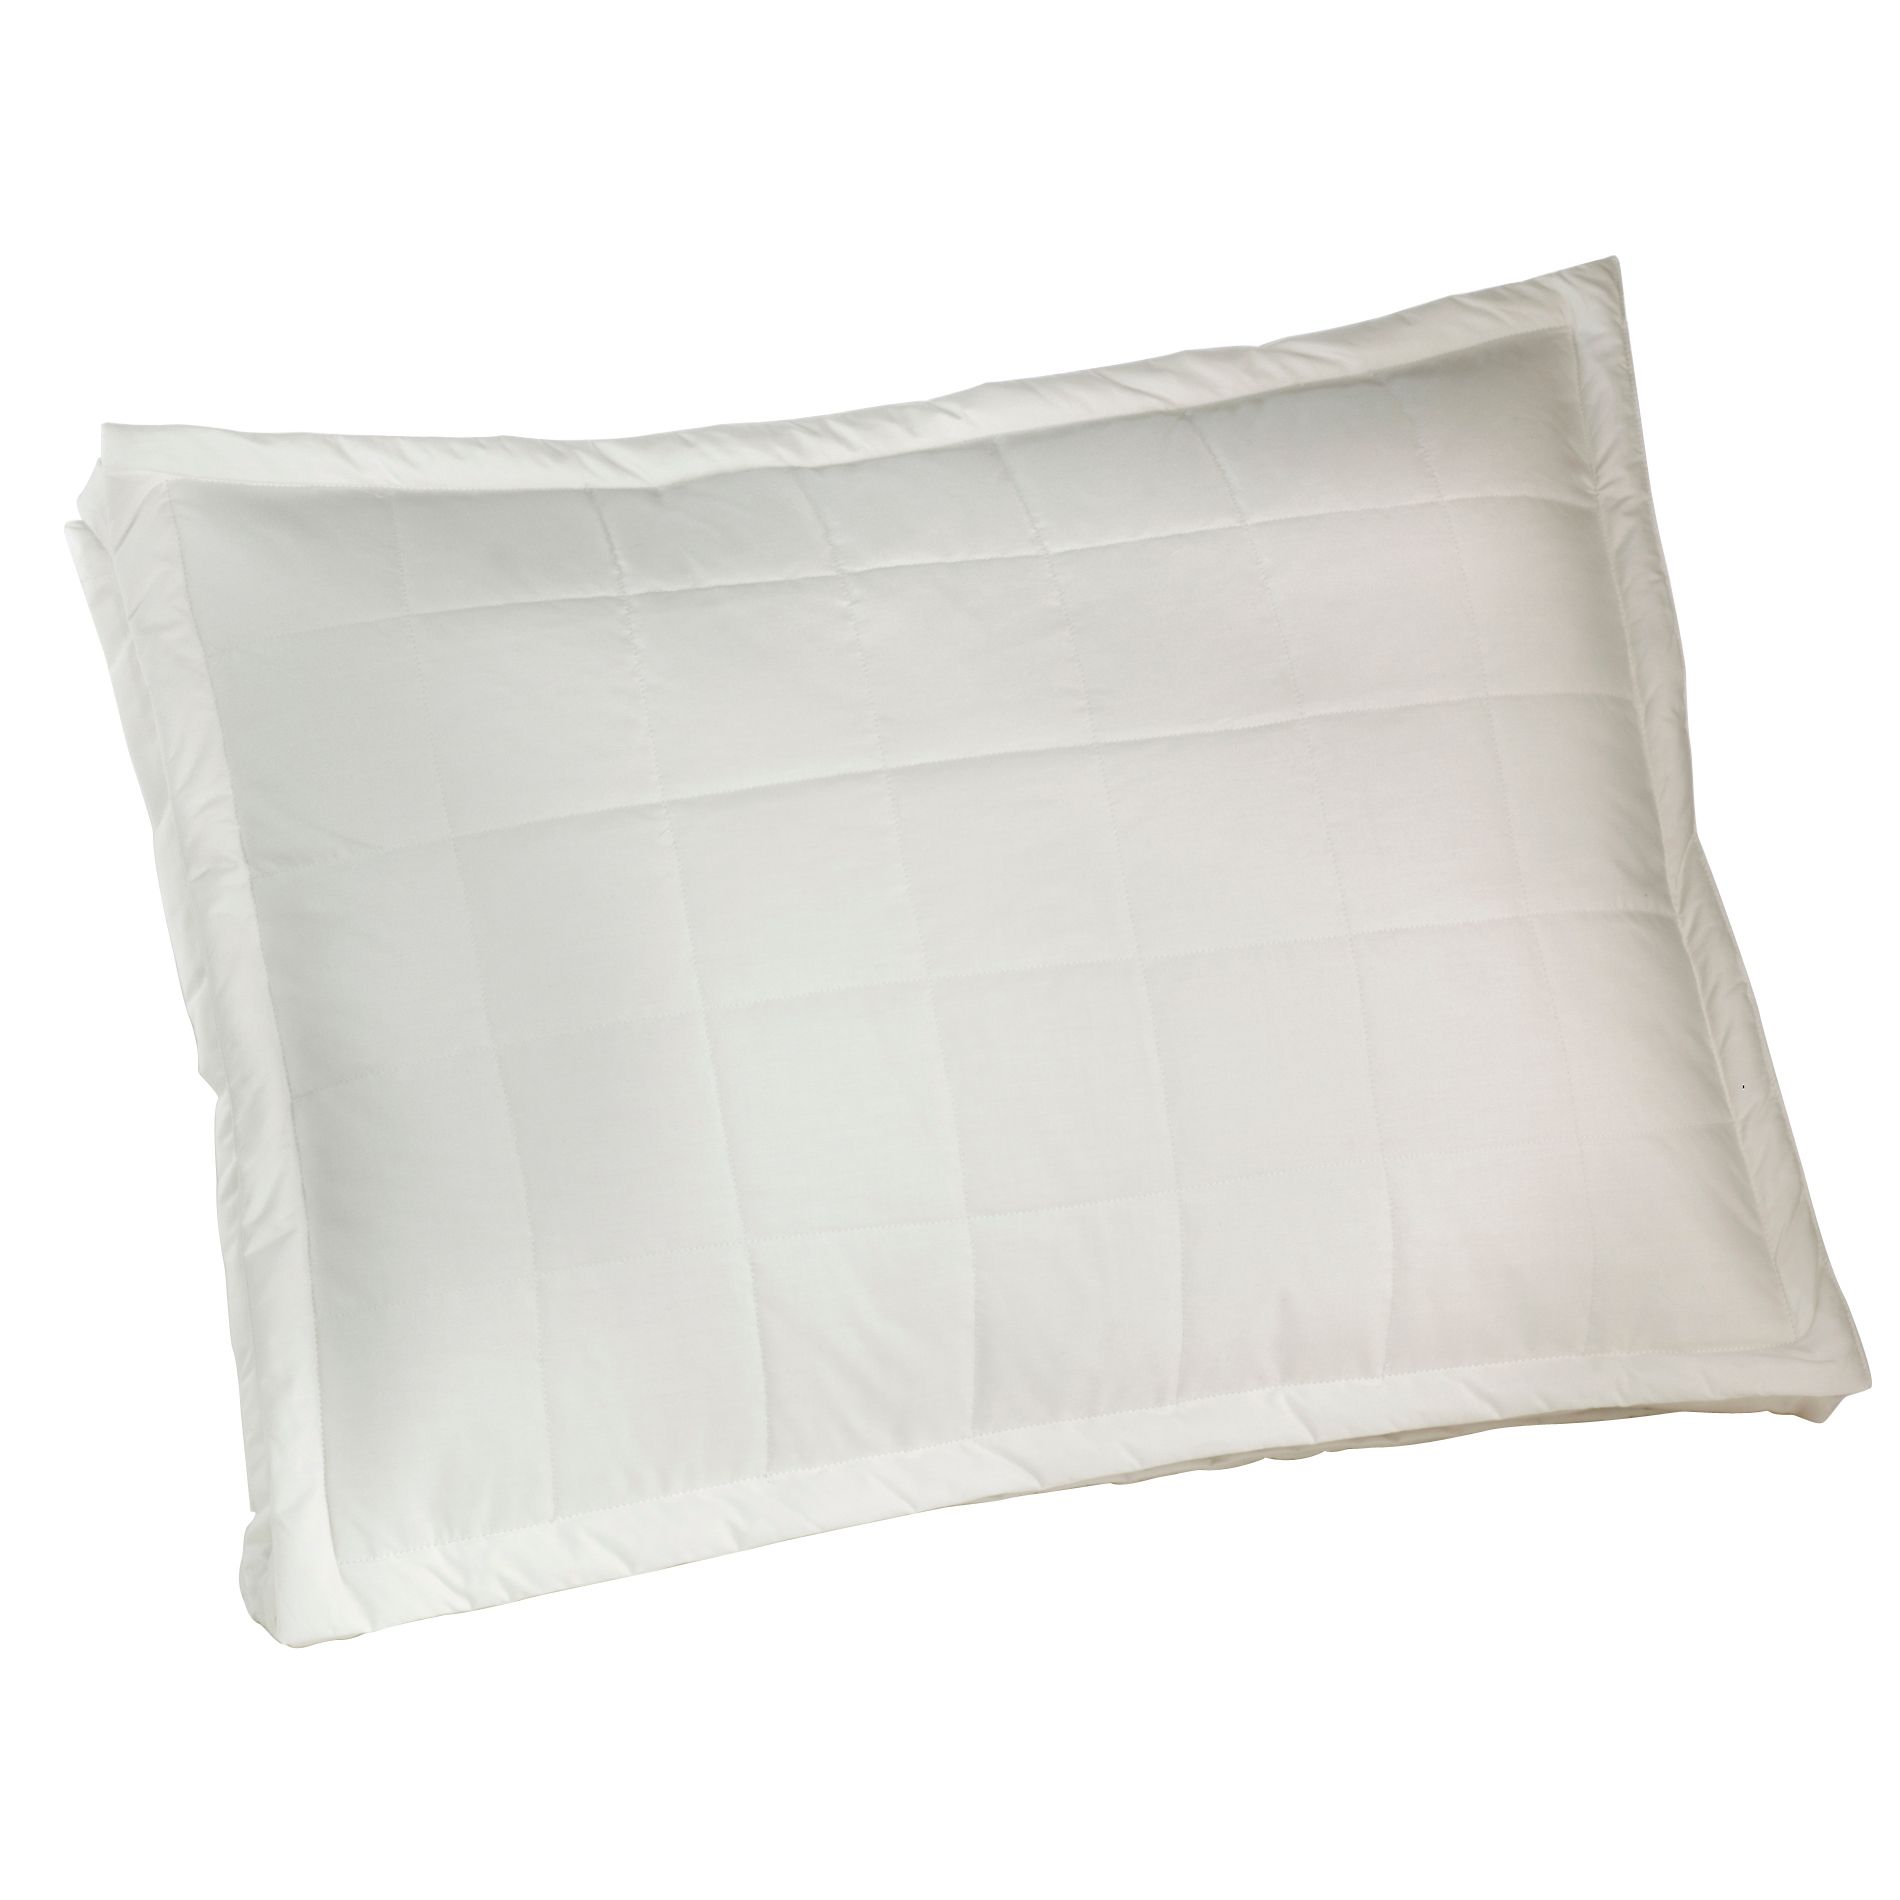 Double Support Down Alternative Pillow